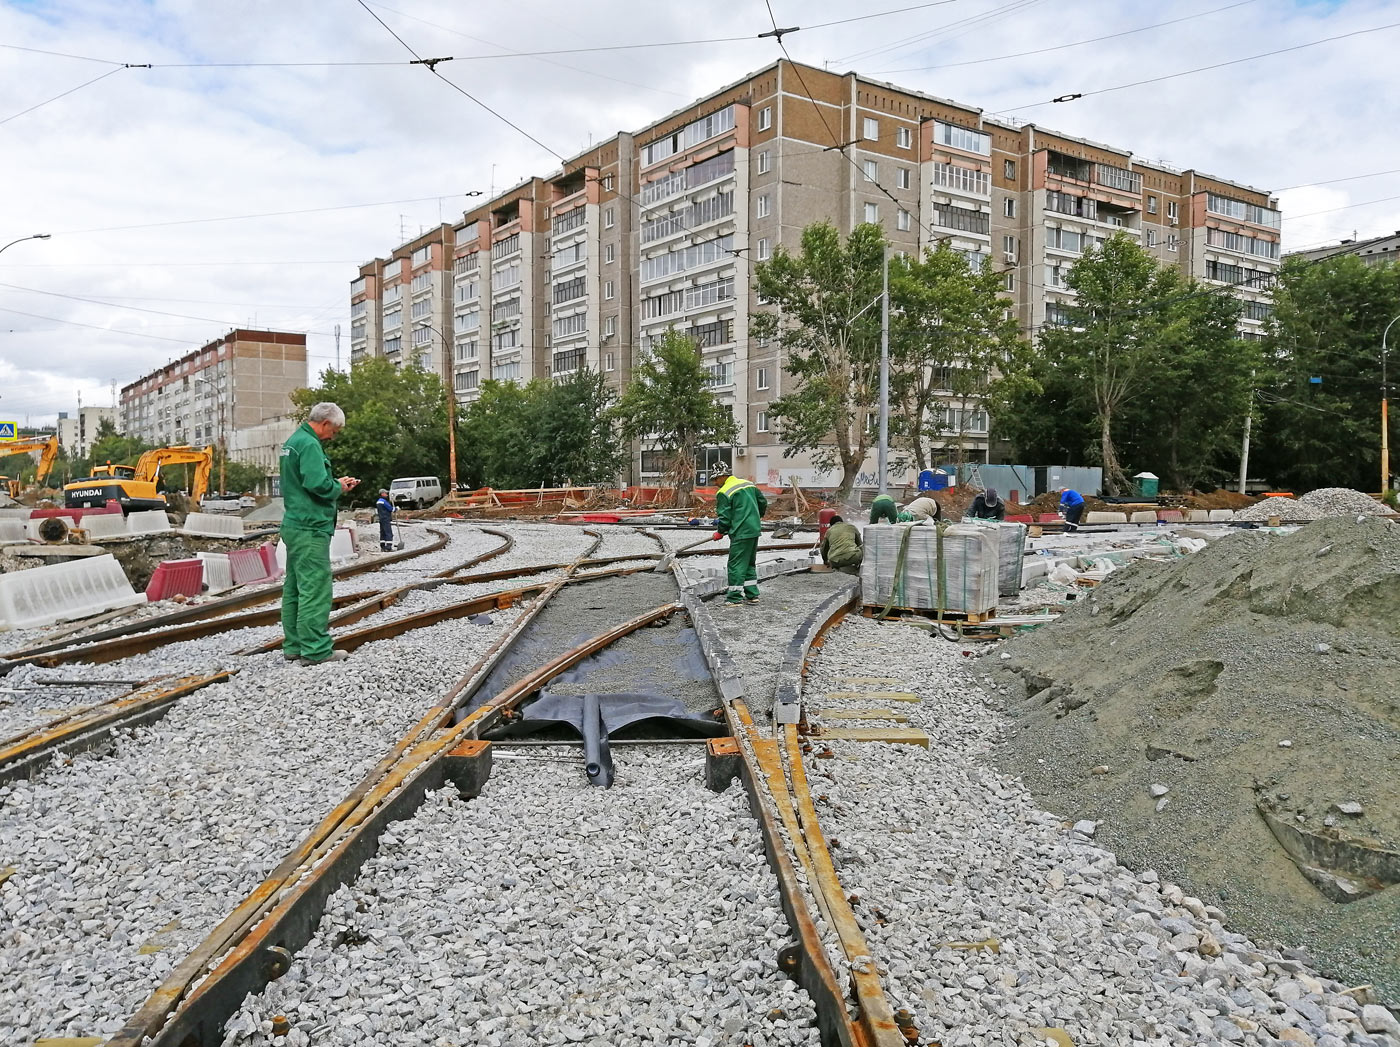 Yekaterinburg — The construction of a tram line Ekaterinburg — Verhnyaya Pyshma; Verkhniaya Pyshma — The construction of a tram line Ekaterinburg — Verhnyaya Pyshma